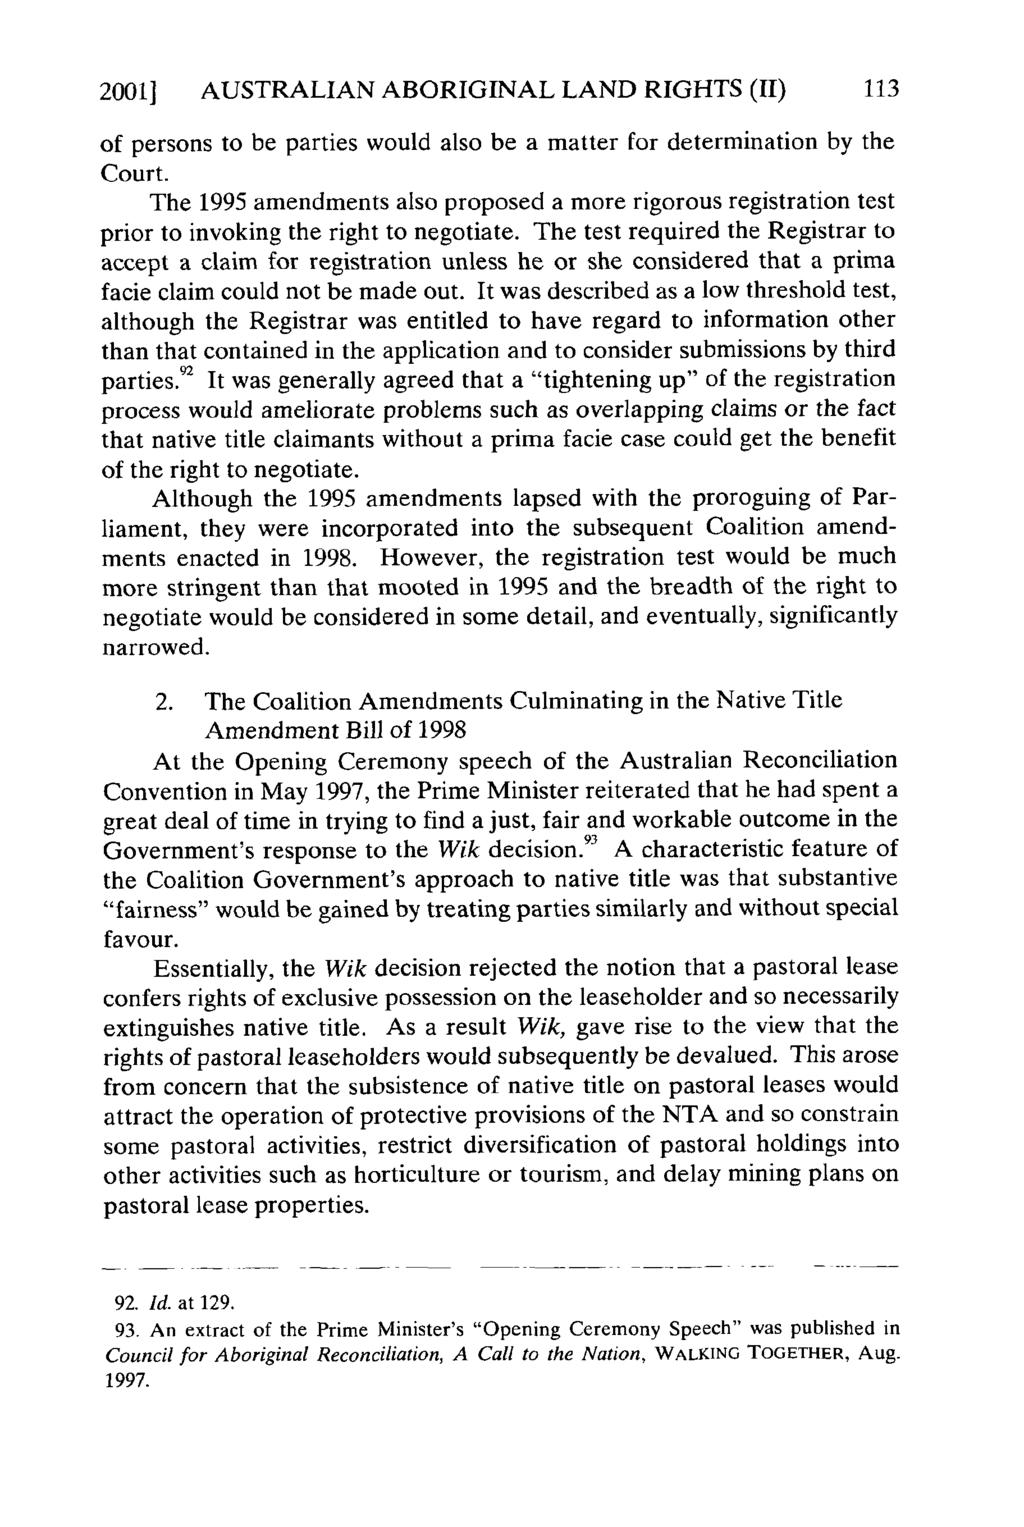 20011 AUSTRALIAN ABORIGINAL LAND RIGHTS (II) 113 of persons to be parties would also be a matter for determination by the Court.